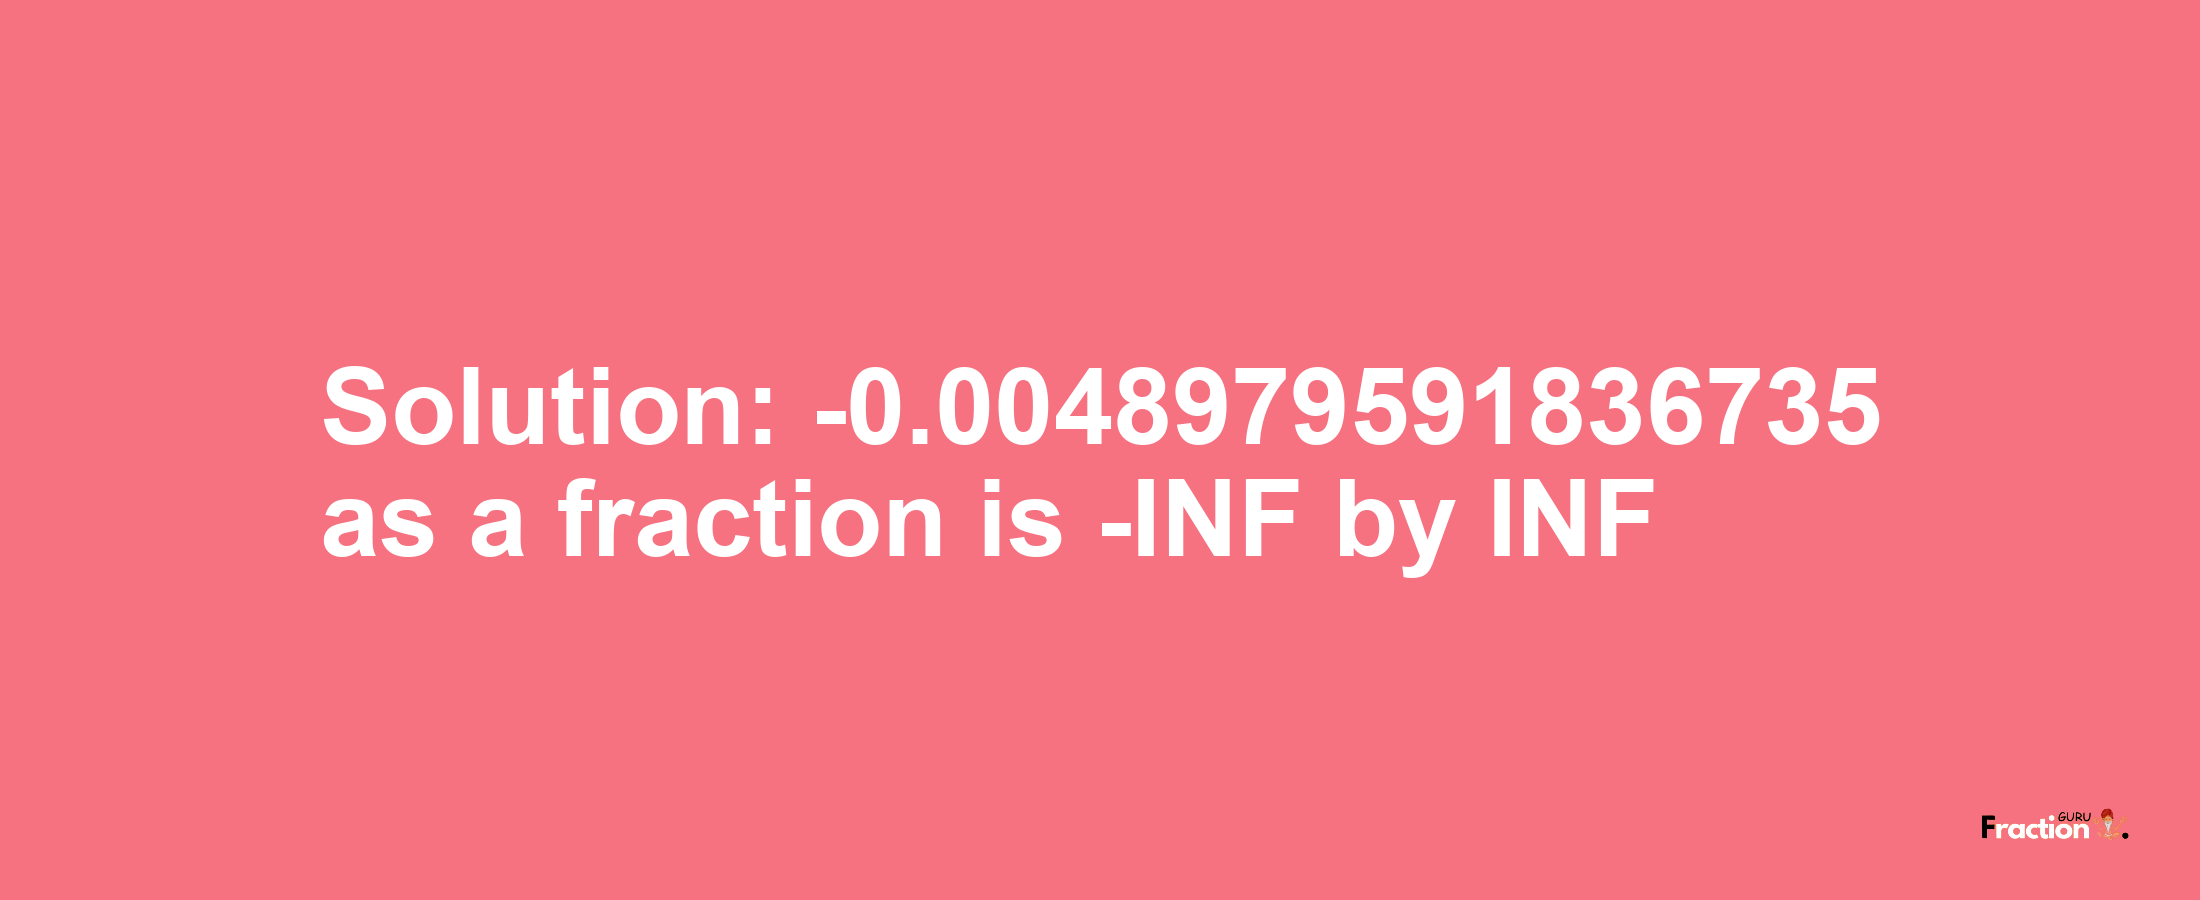 Solution:-0.0048979591836735 as a fraction is -INF/INF